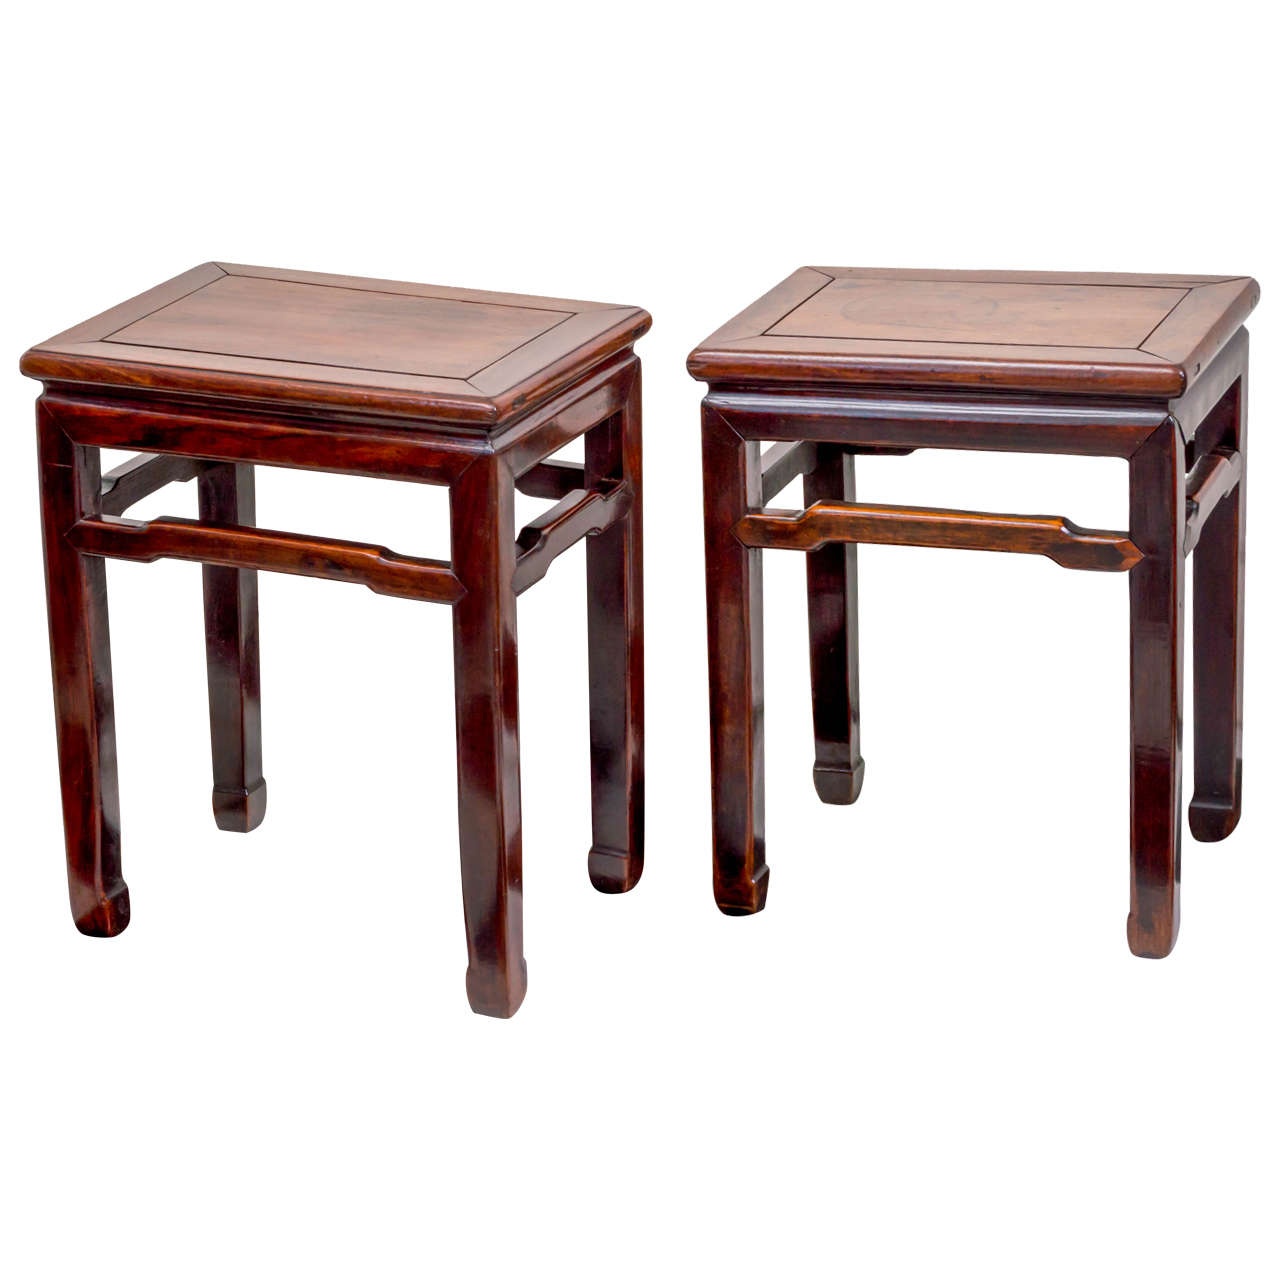 Pair of Late 19th Century Chinese Rosewood Side Tables